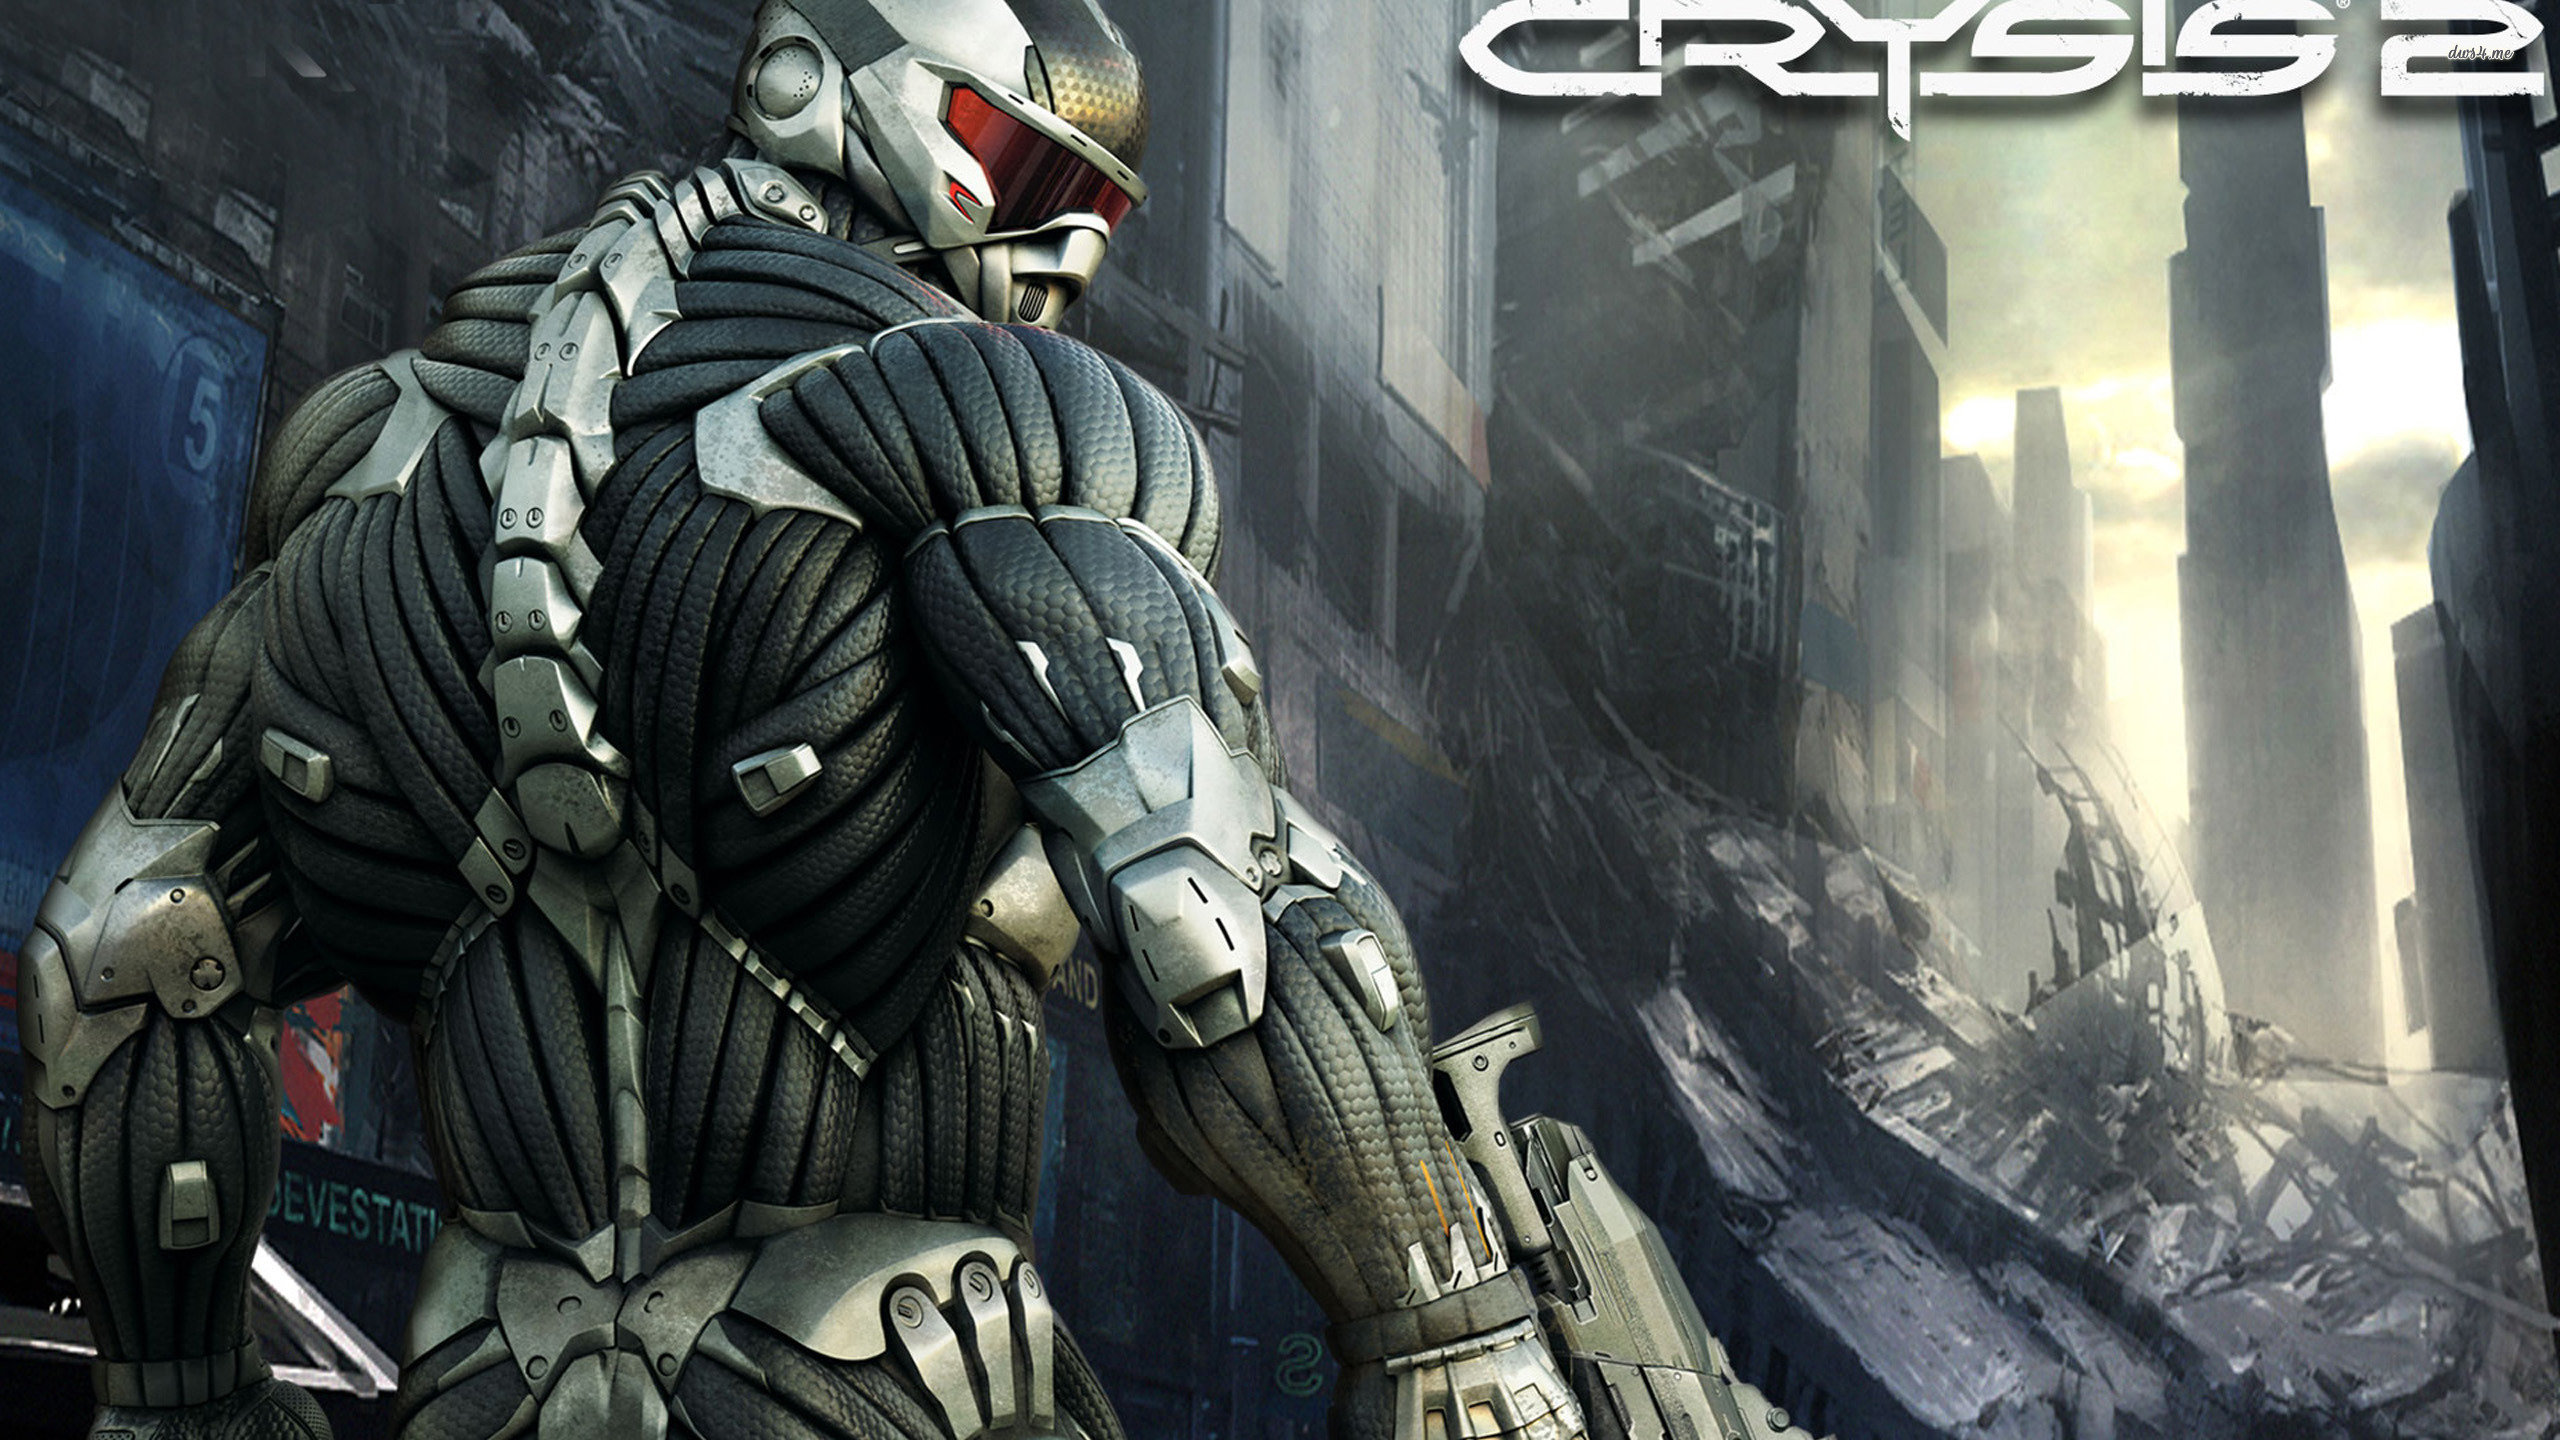 Awesome Crysis 2 free wallpaper ID:379749 for hd 2560x1440 desktop